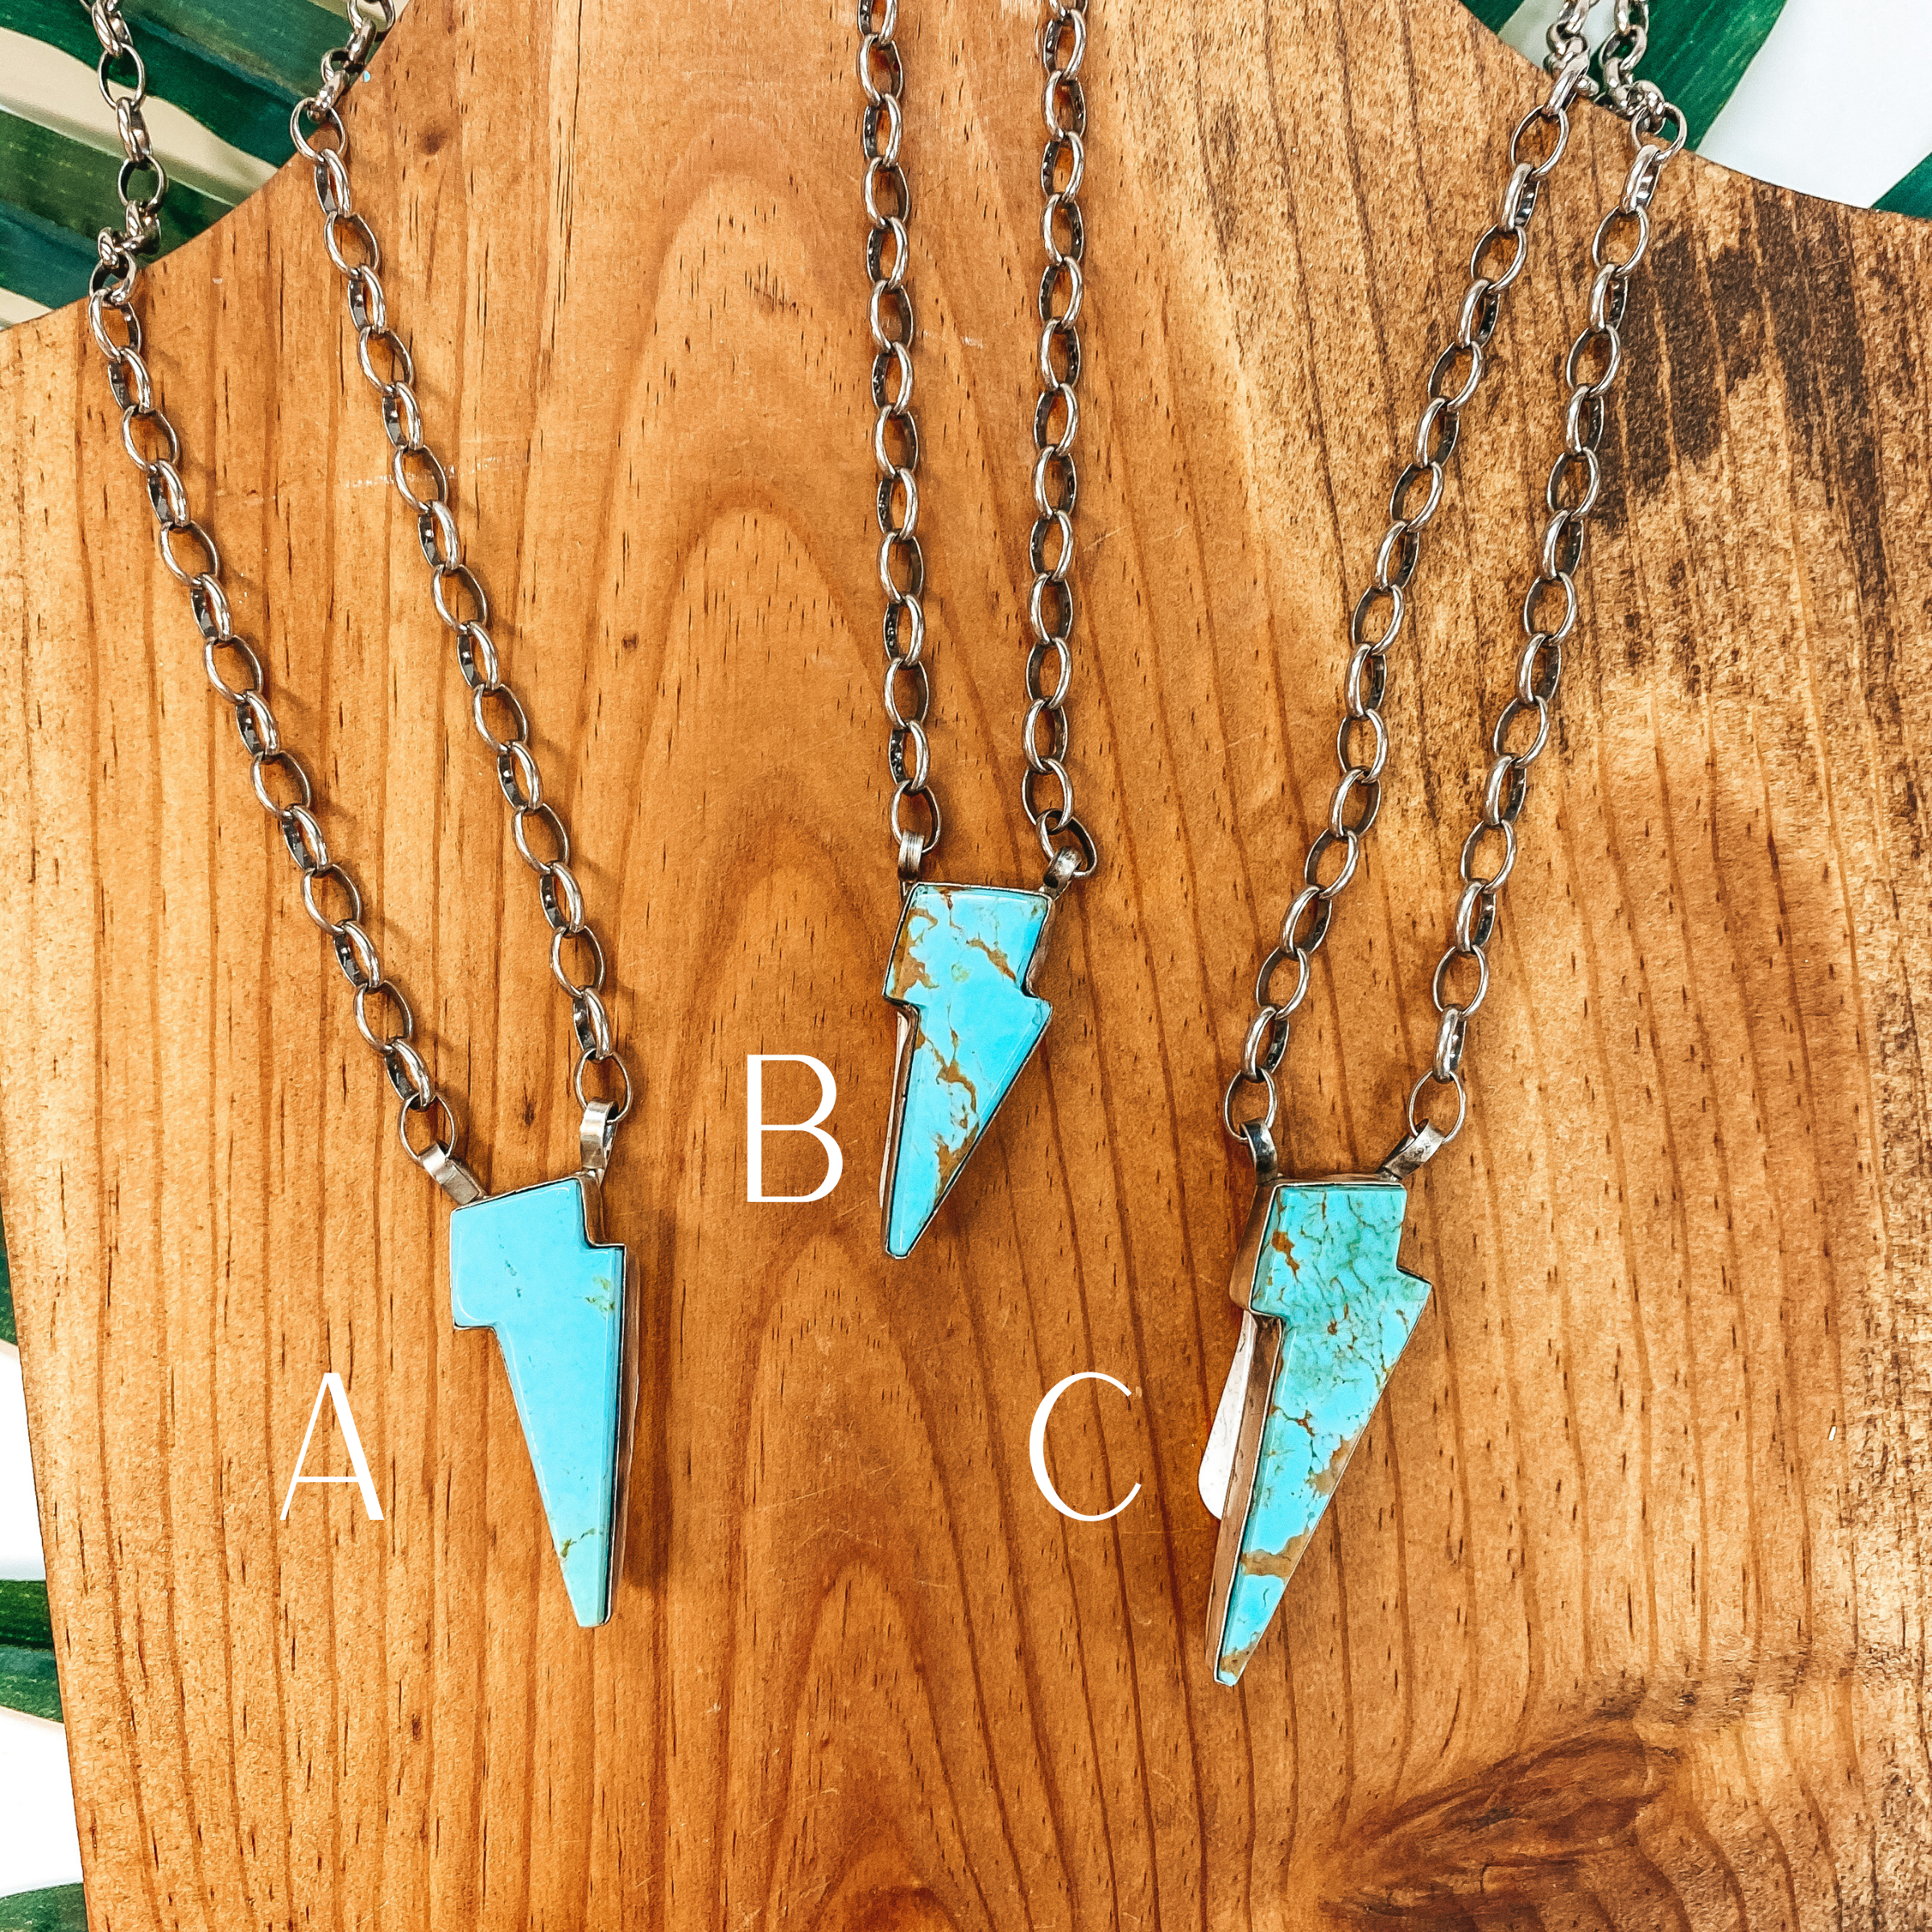 Vernon Johnson | Navajo Handmade Sterling Silver Necklace with Kingman Turquoise Lightning Bolt Pendant - Giddy Up Glamour Boutique